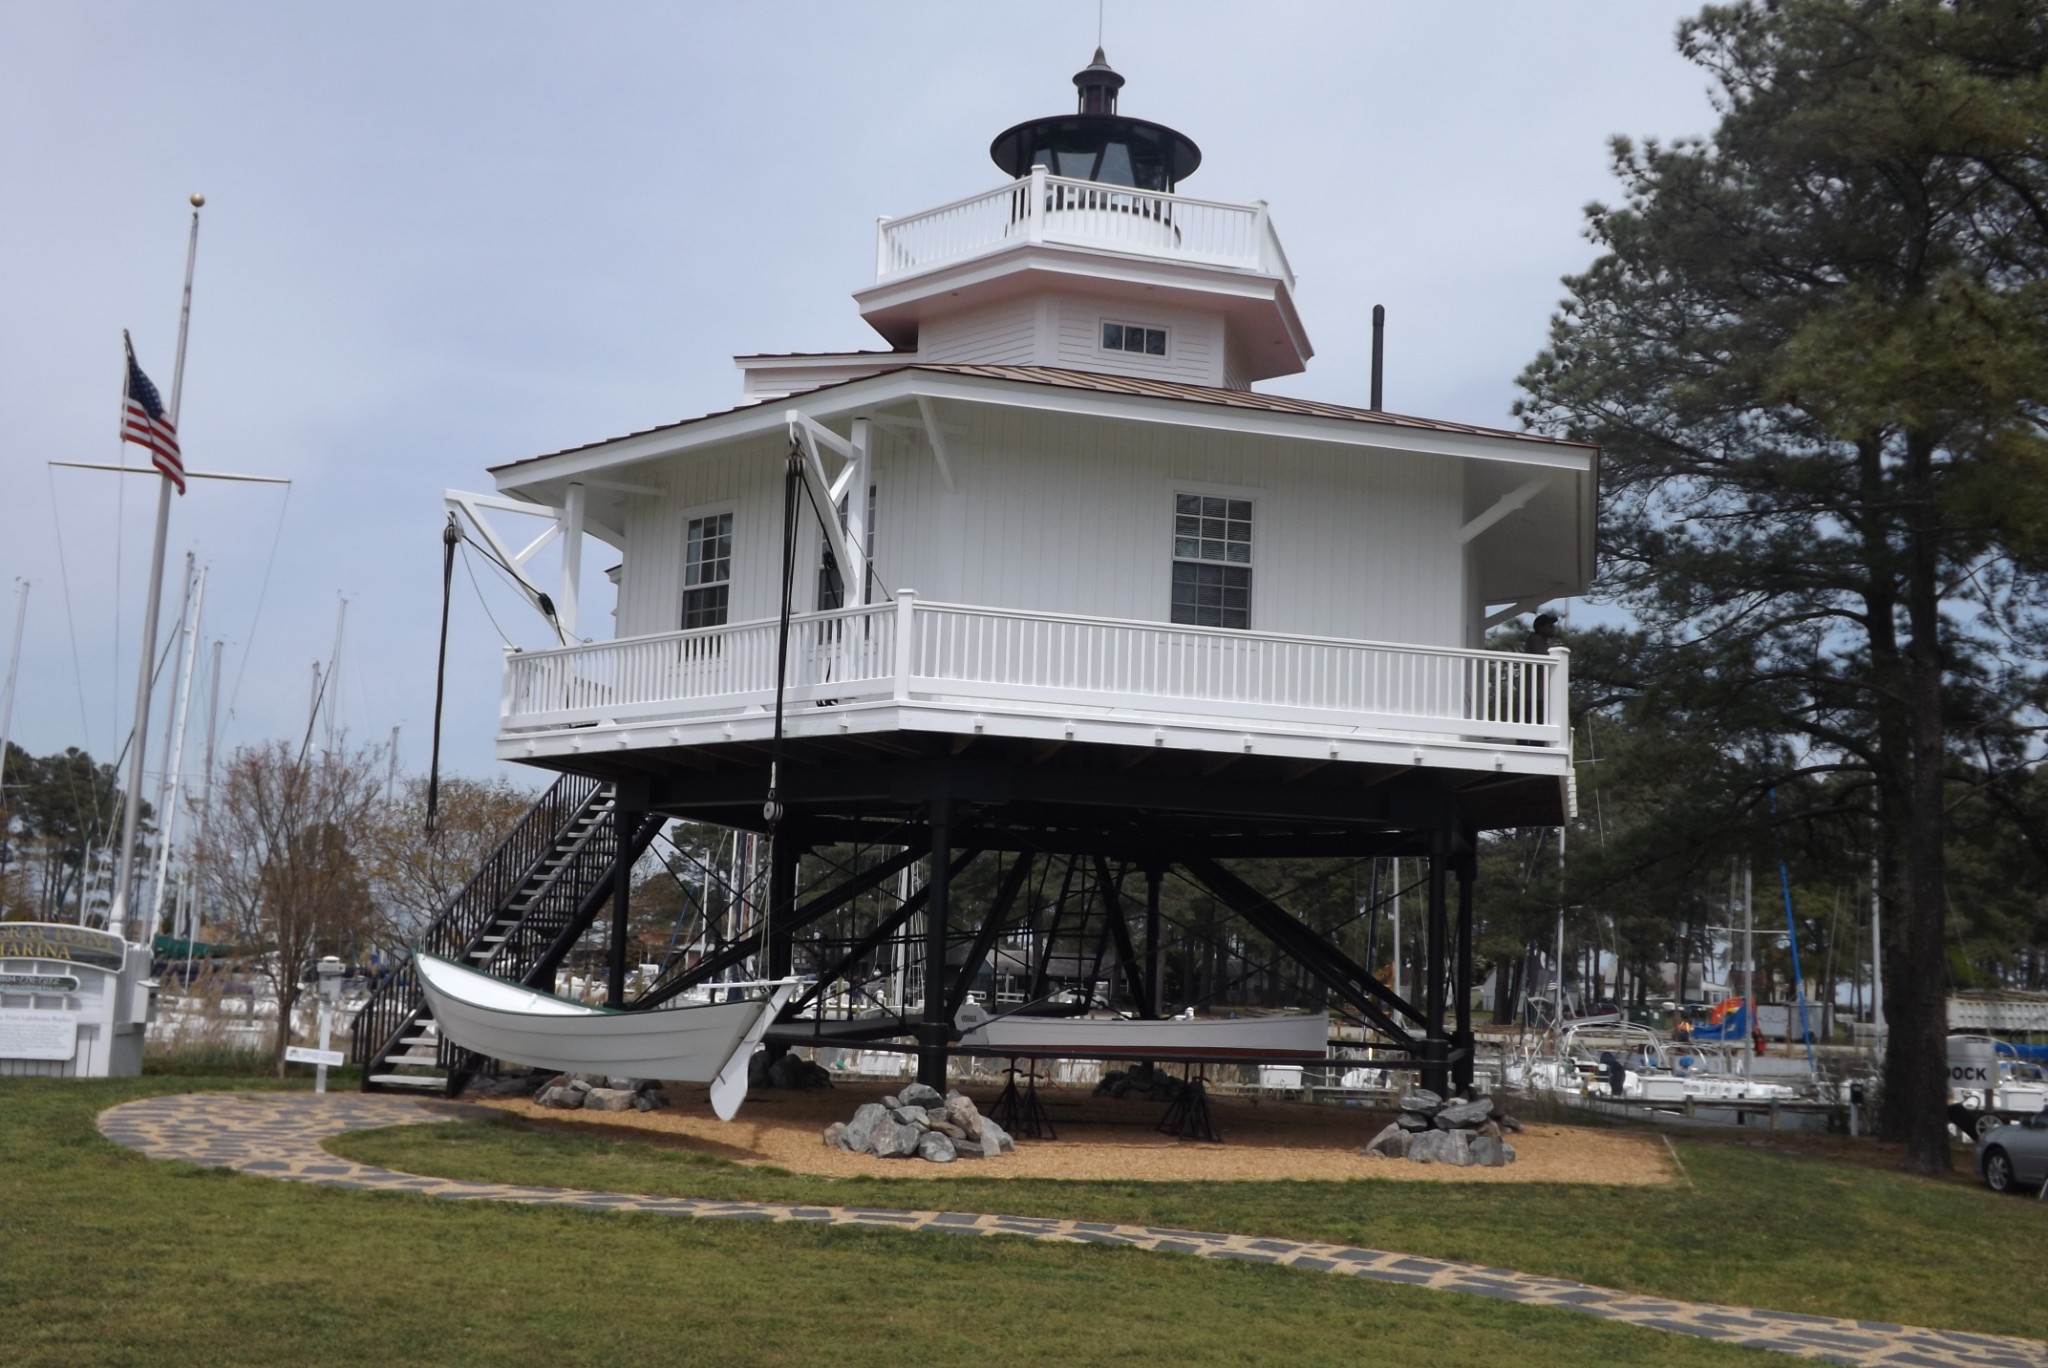 MPAAGHS visit to Fishing Bay Estates, Stingray Point and the Deltaville Maritime Museum in Deltaville, VA